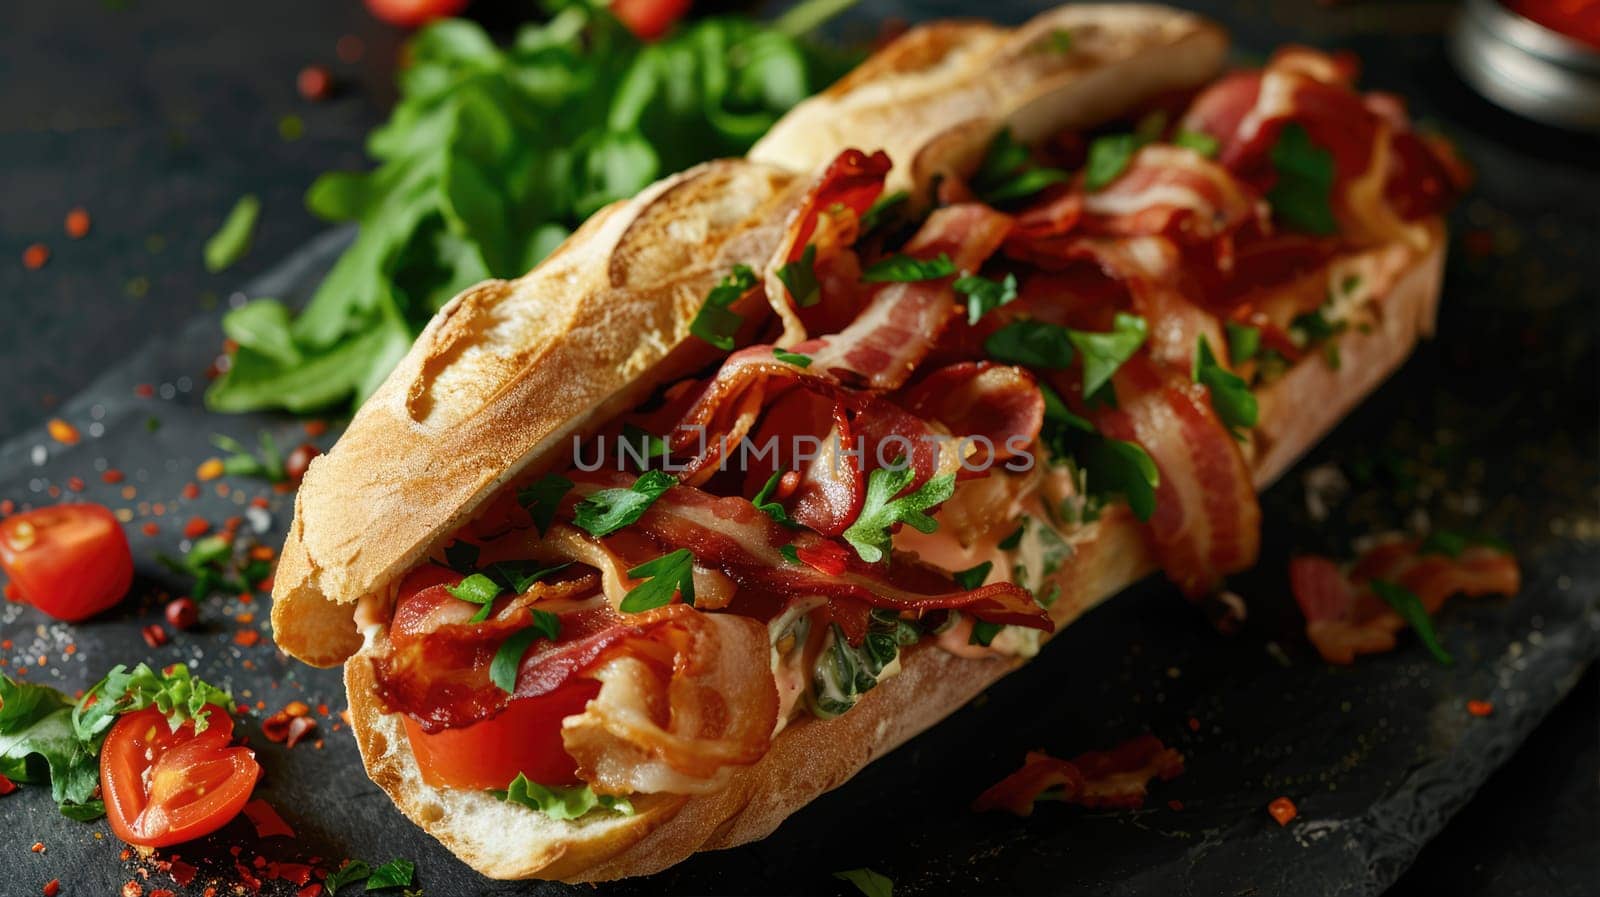 Sandwich with ciabatta and bacon filling on a dark background by natali_brill